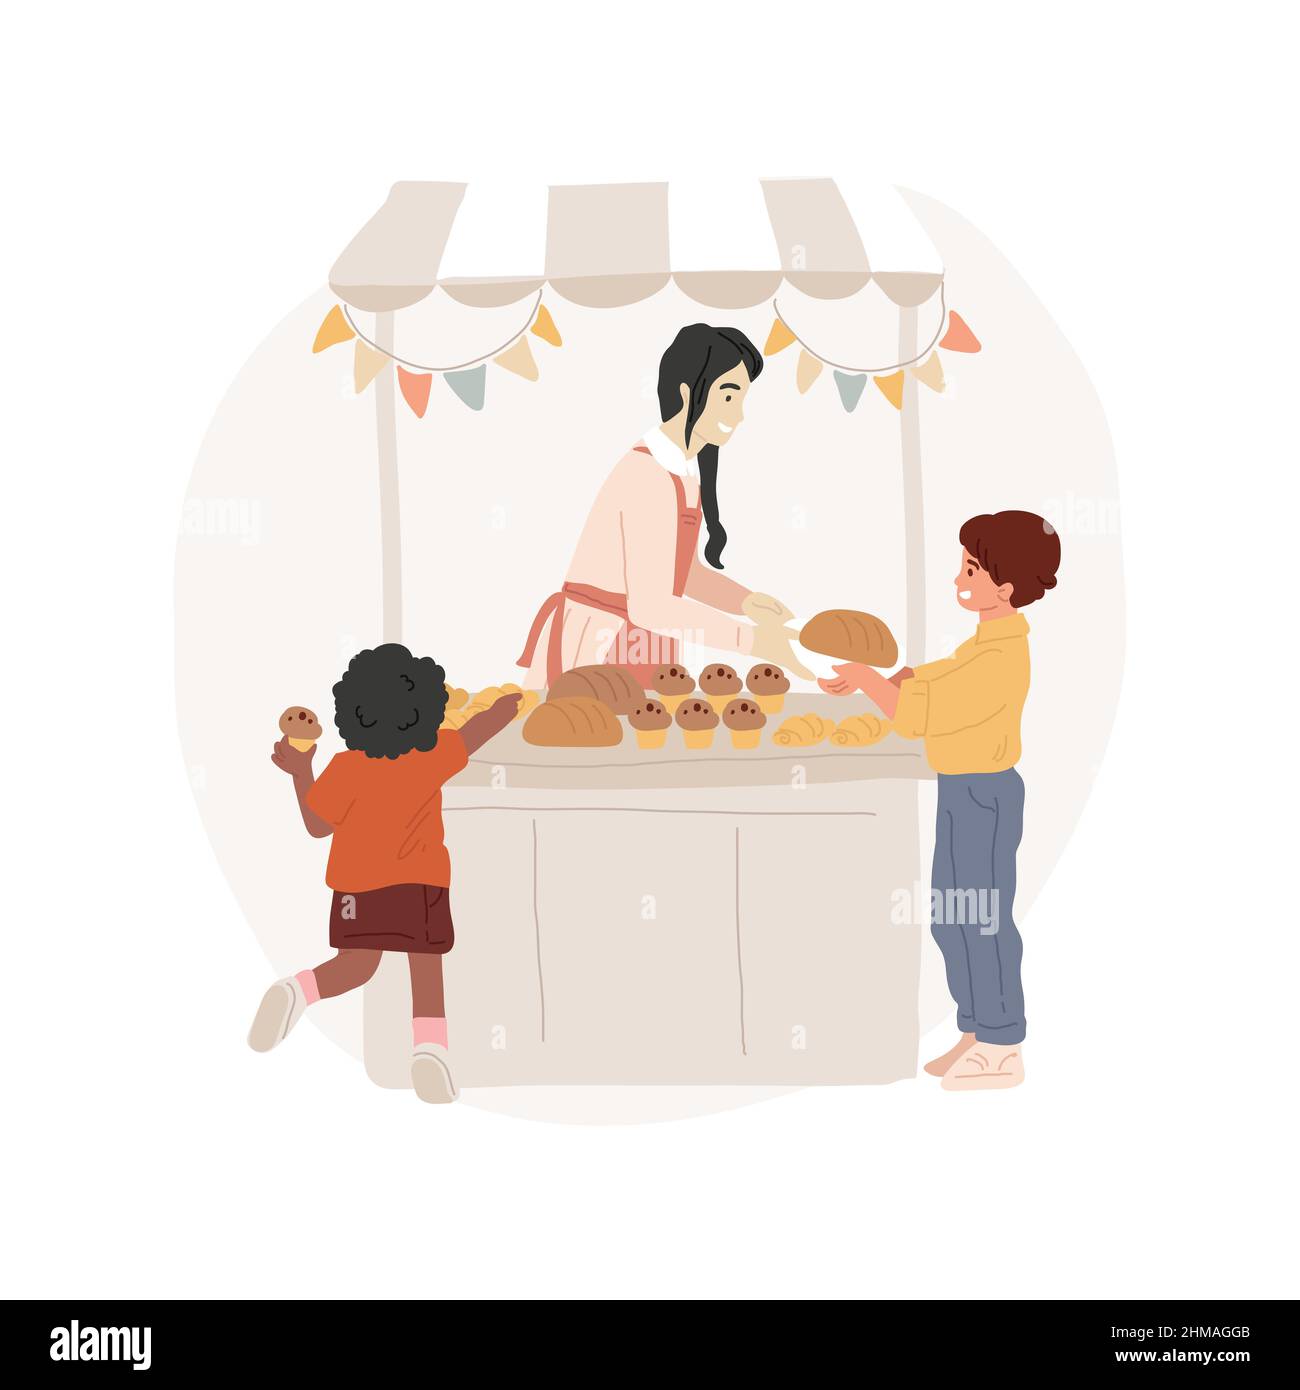 Cake stall isolated cartoon vector illustration. Woman selling cupcakes and muffins, homemade cake stall, sweets, school festival activity, price labels, fair food market cartoon vector. Stock Vector